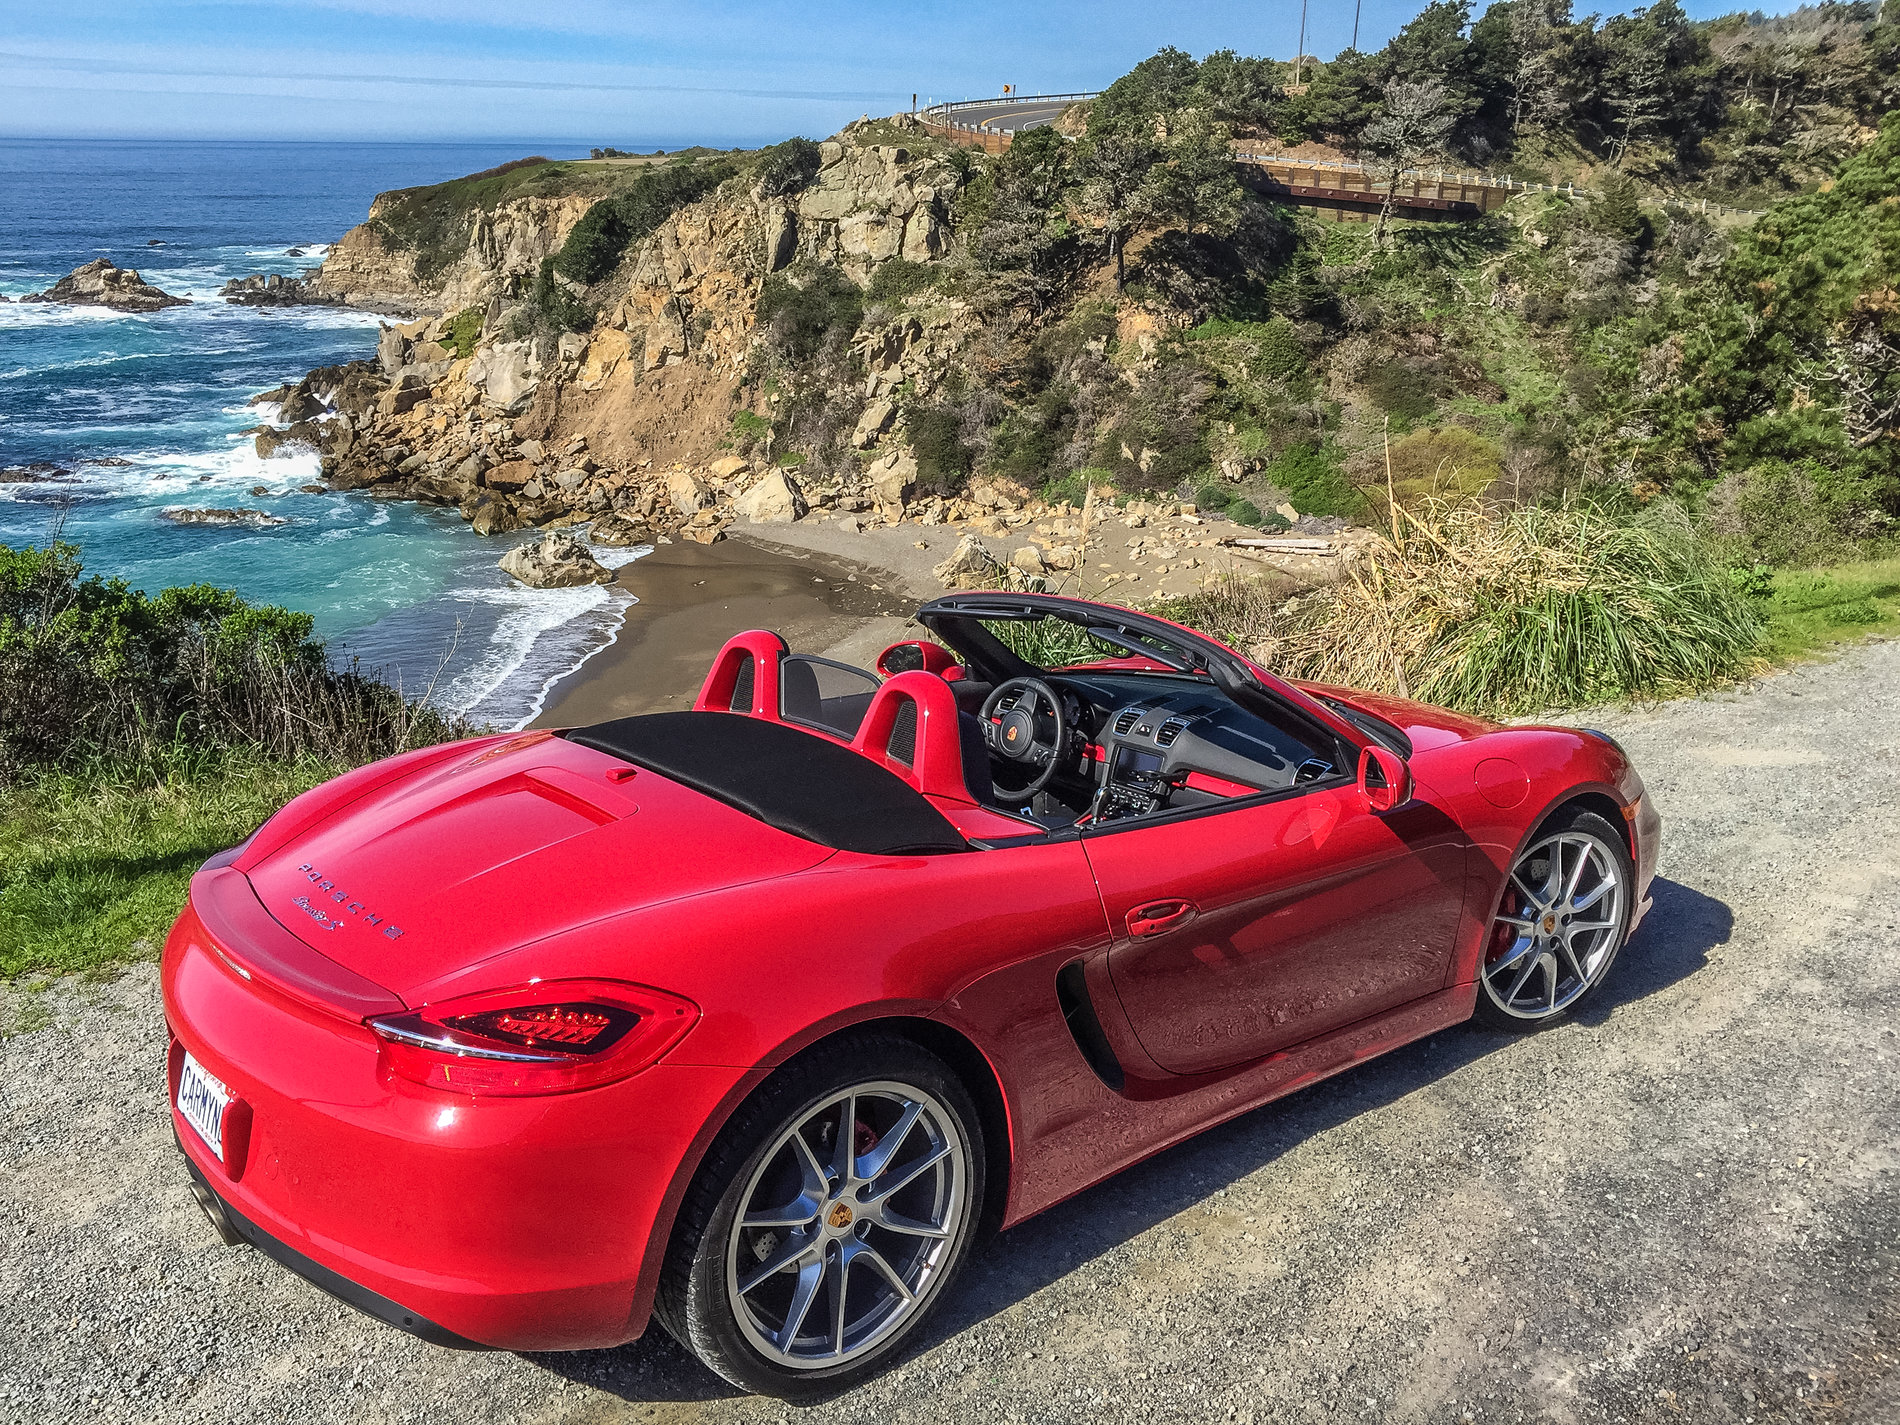 Porsche Taycan My Carmine red Taycan Turbo delivered yesterday A Boxster on the Sonoma Coast